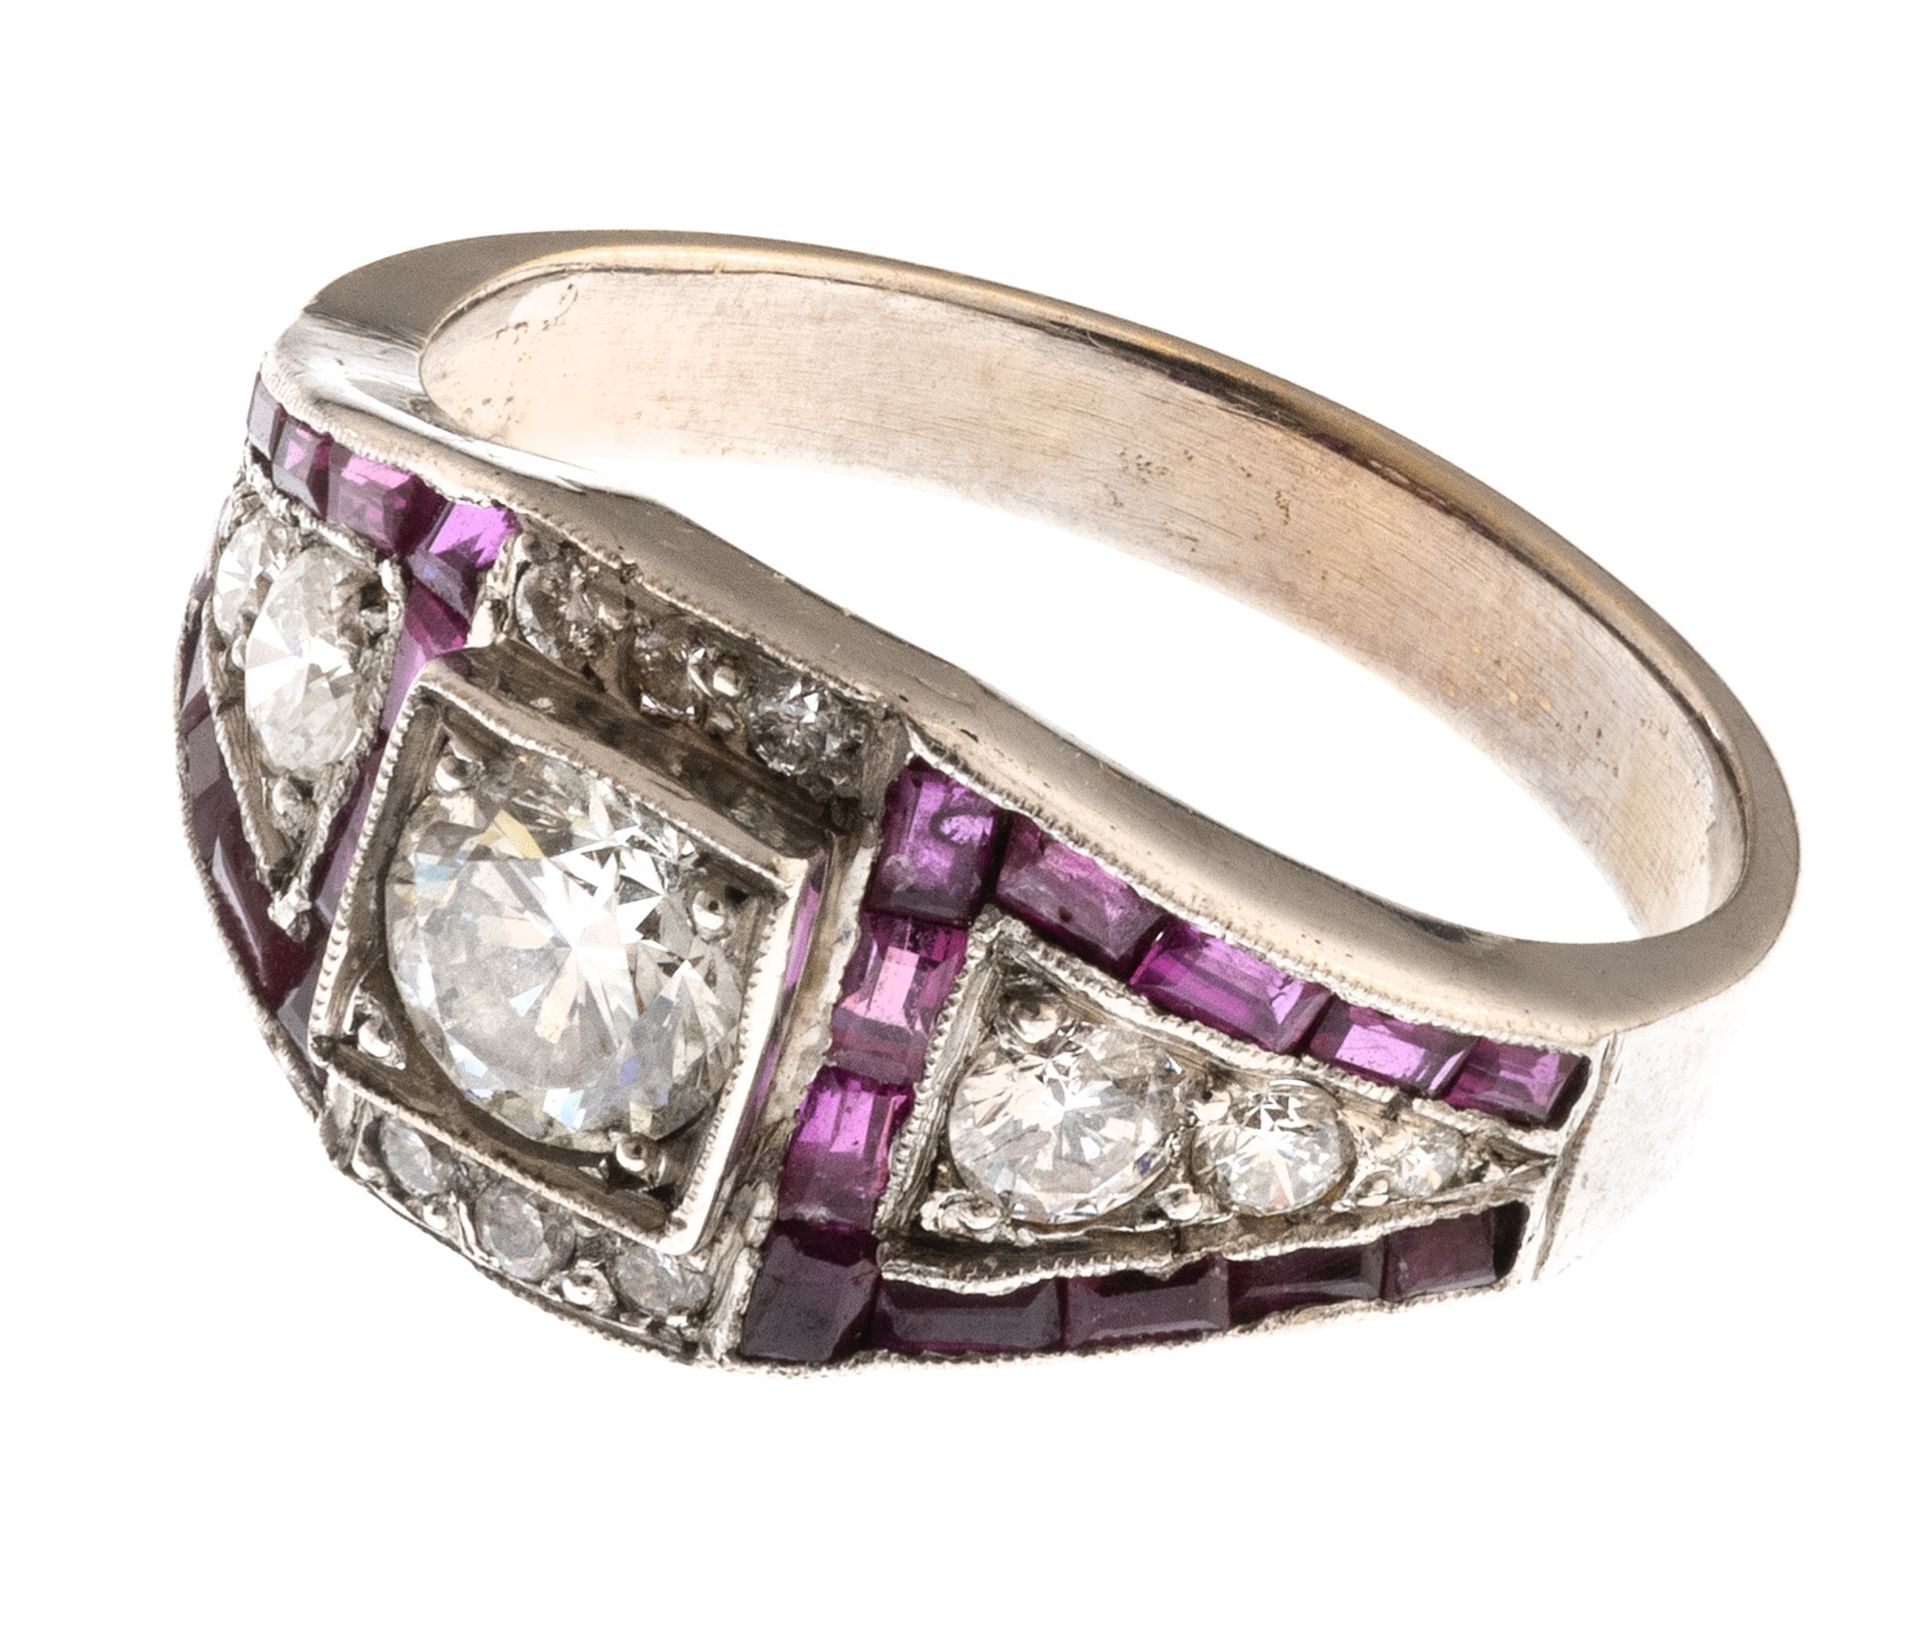 PLATINUM RING WITH DIAMONDS AND RUBIES